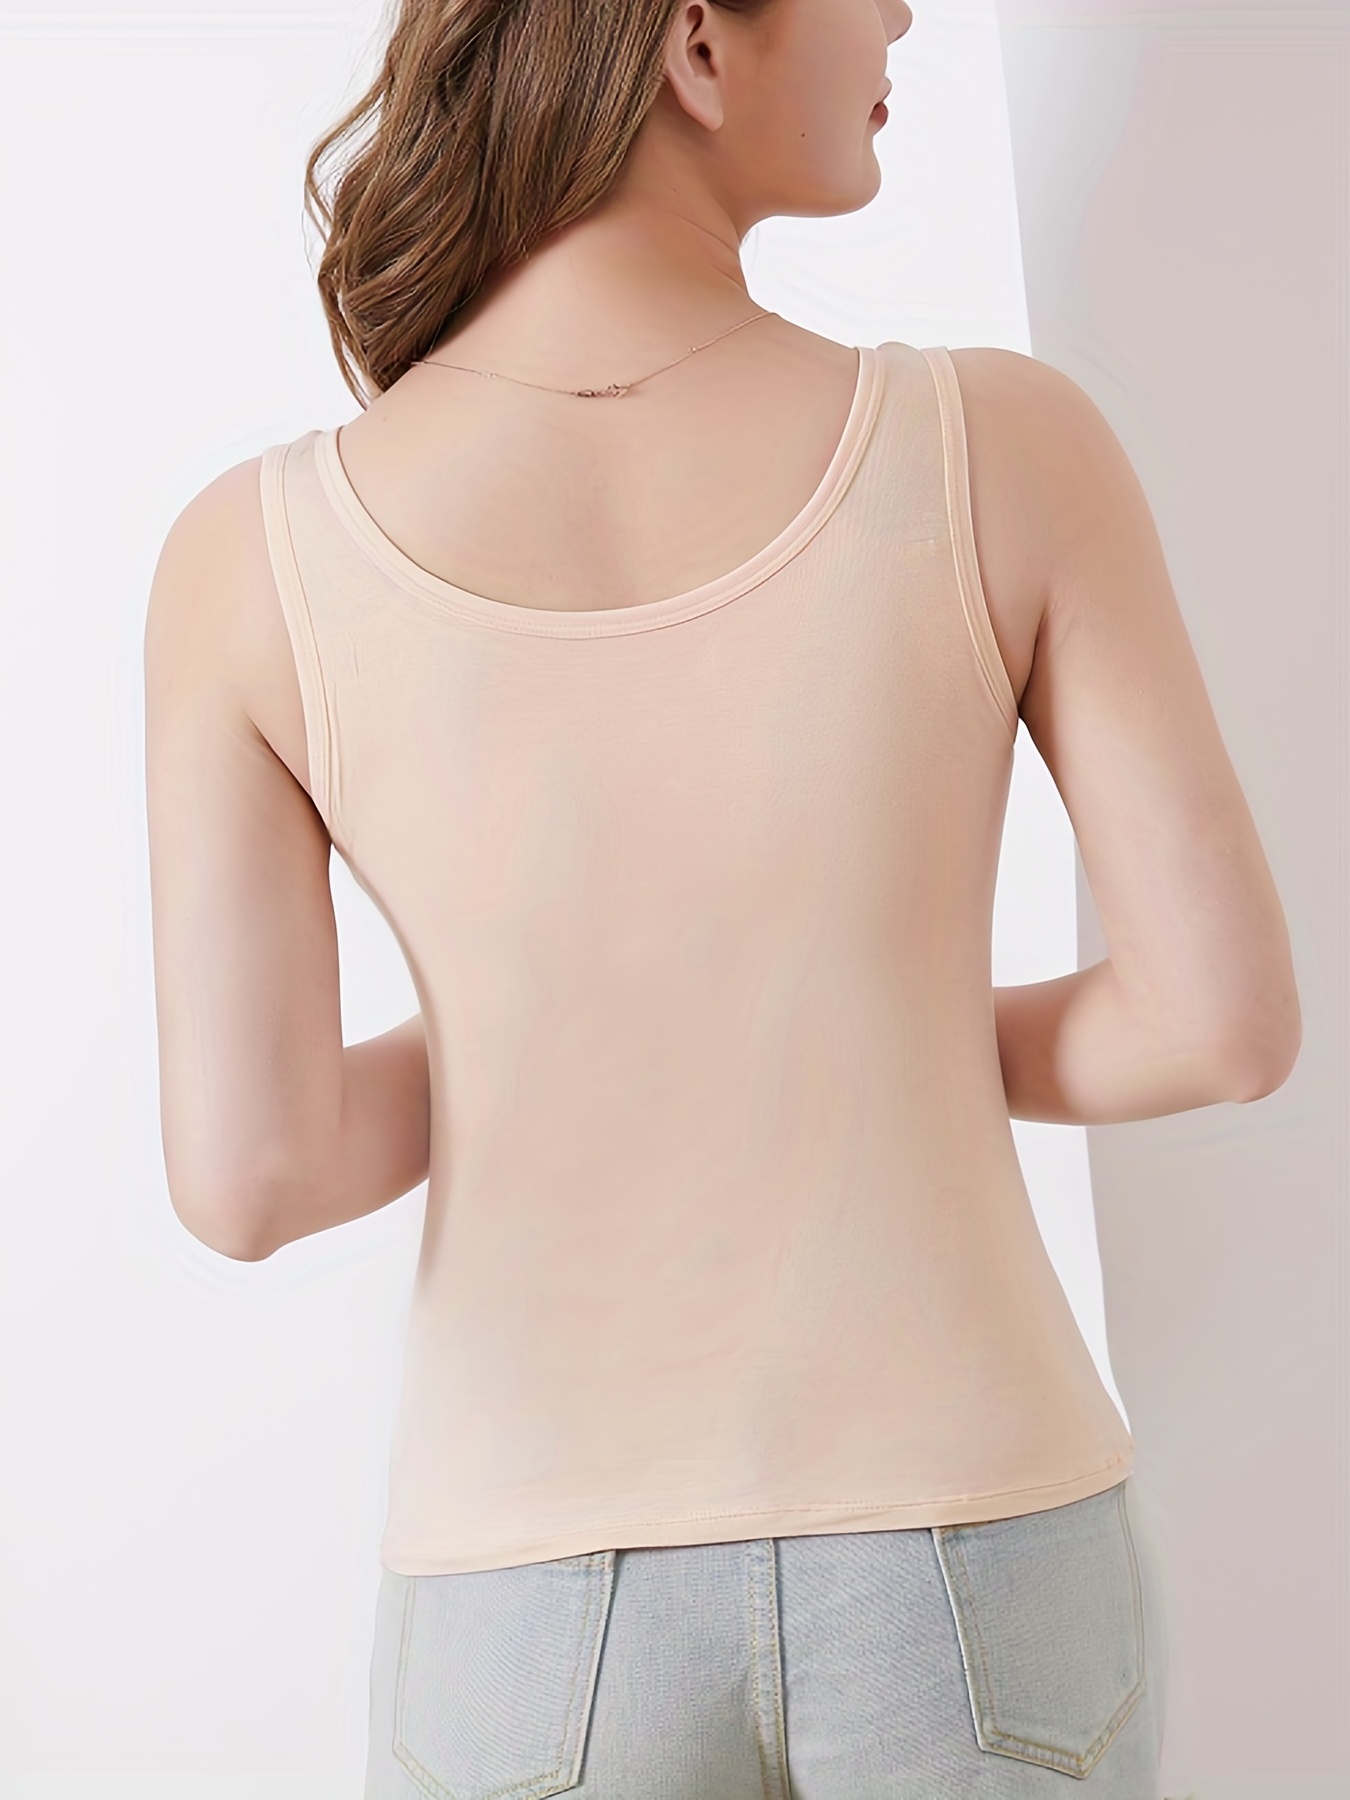 Padded Bra Shirt Women Tops padded Camisole breathable tank tops